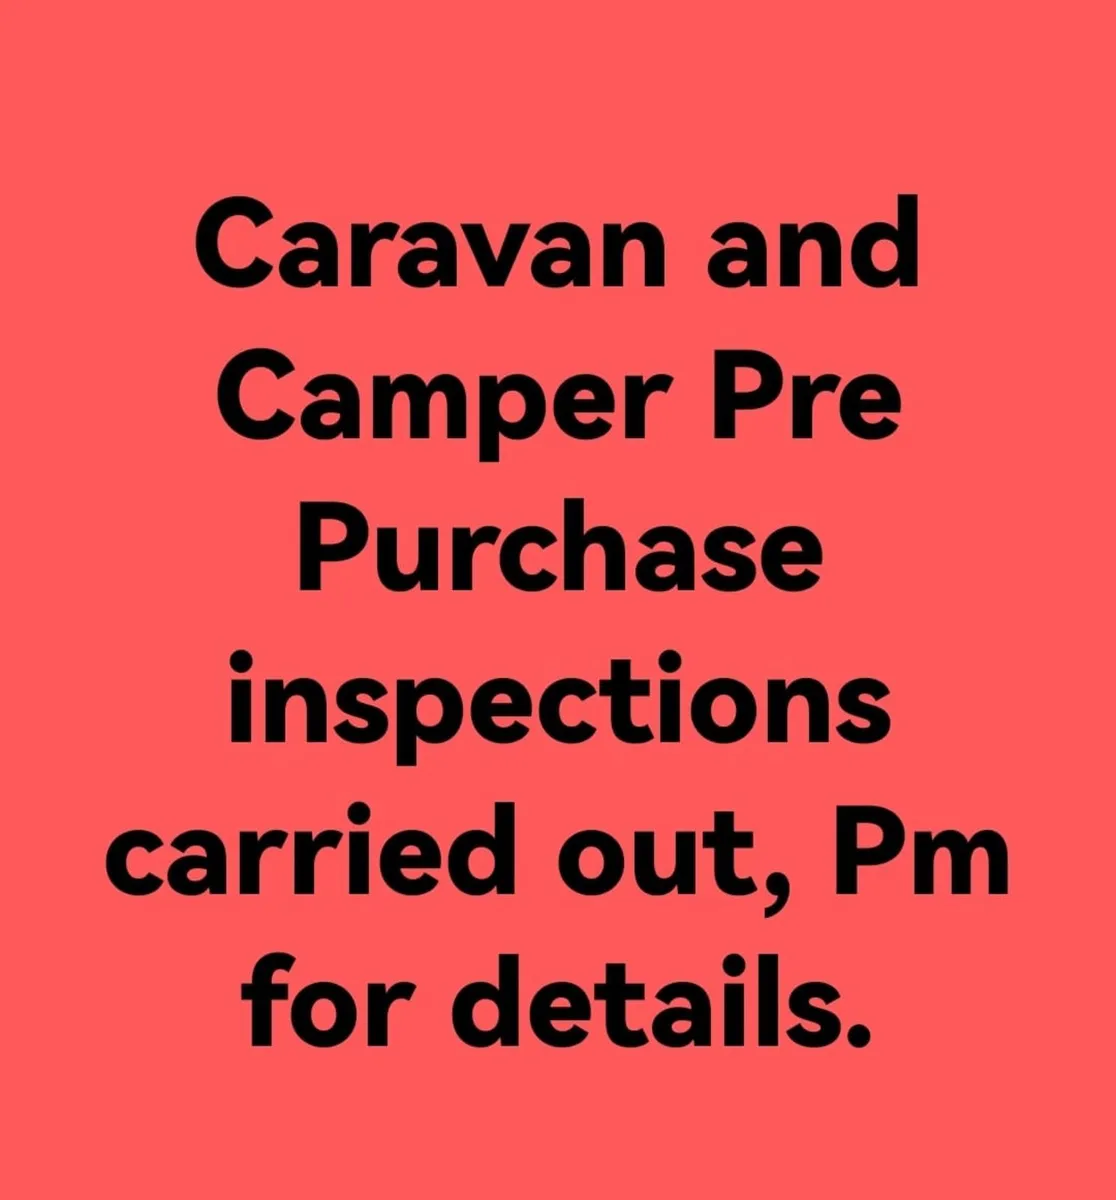 Caravan and Camper Pre Purchase inspections